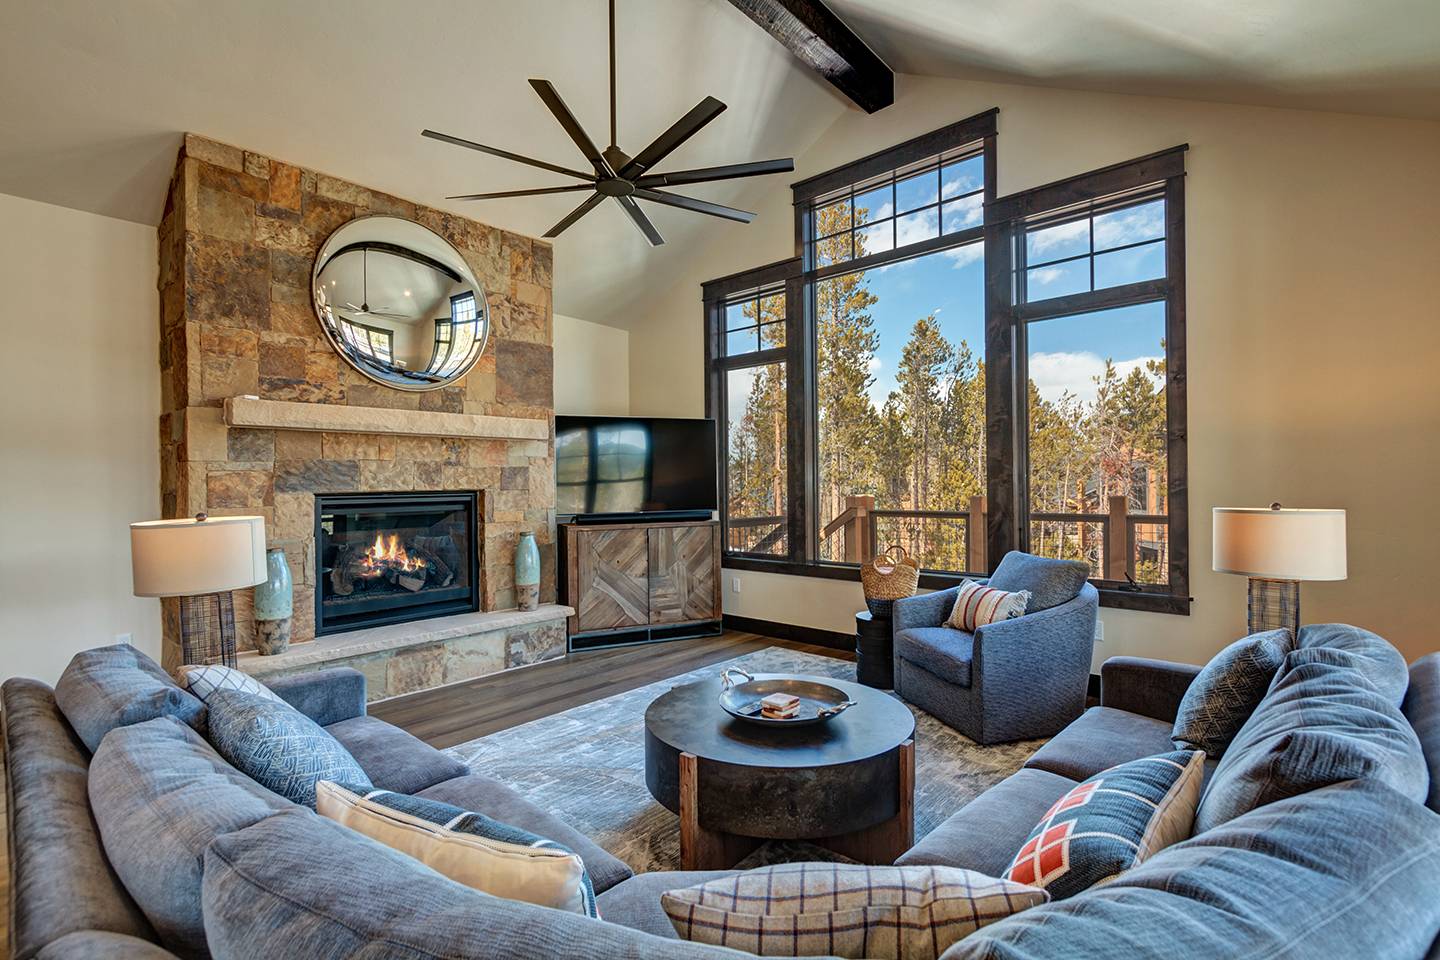 Fireplace, views, and furnishings at Langdale Cabin in Breckenridge.